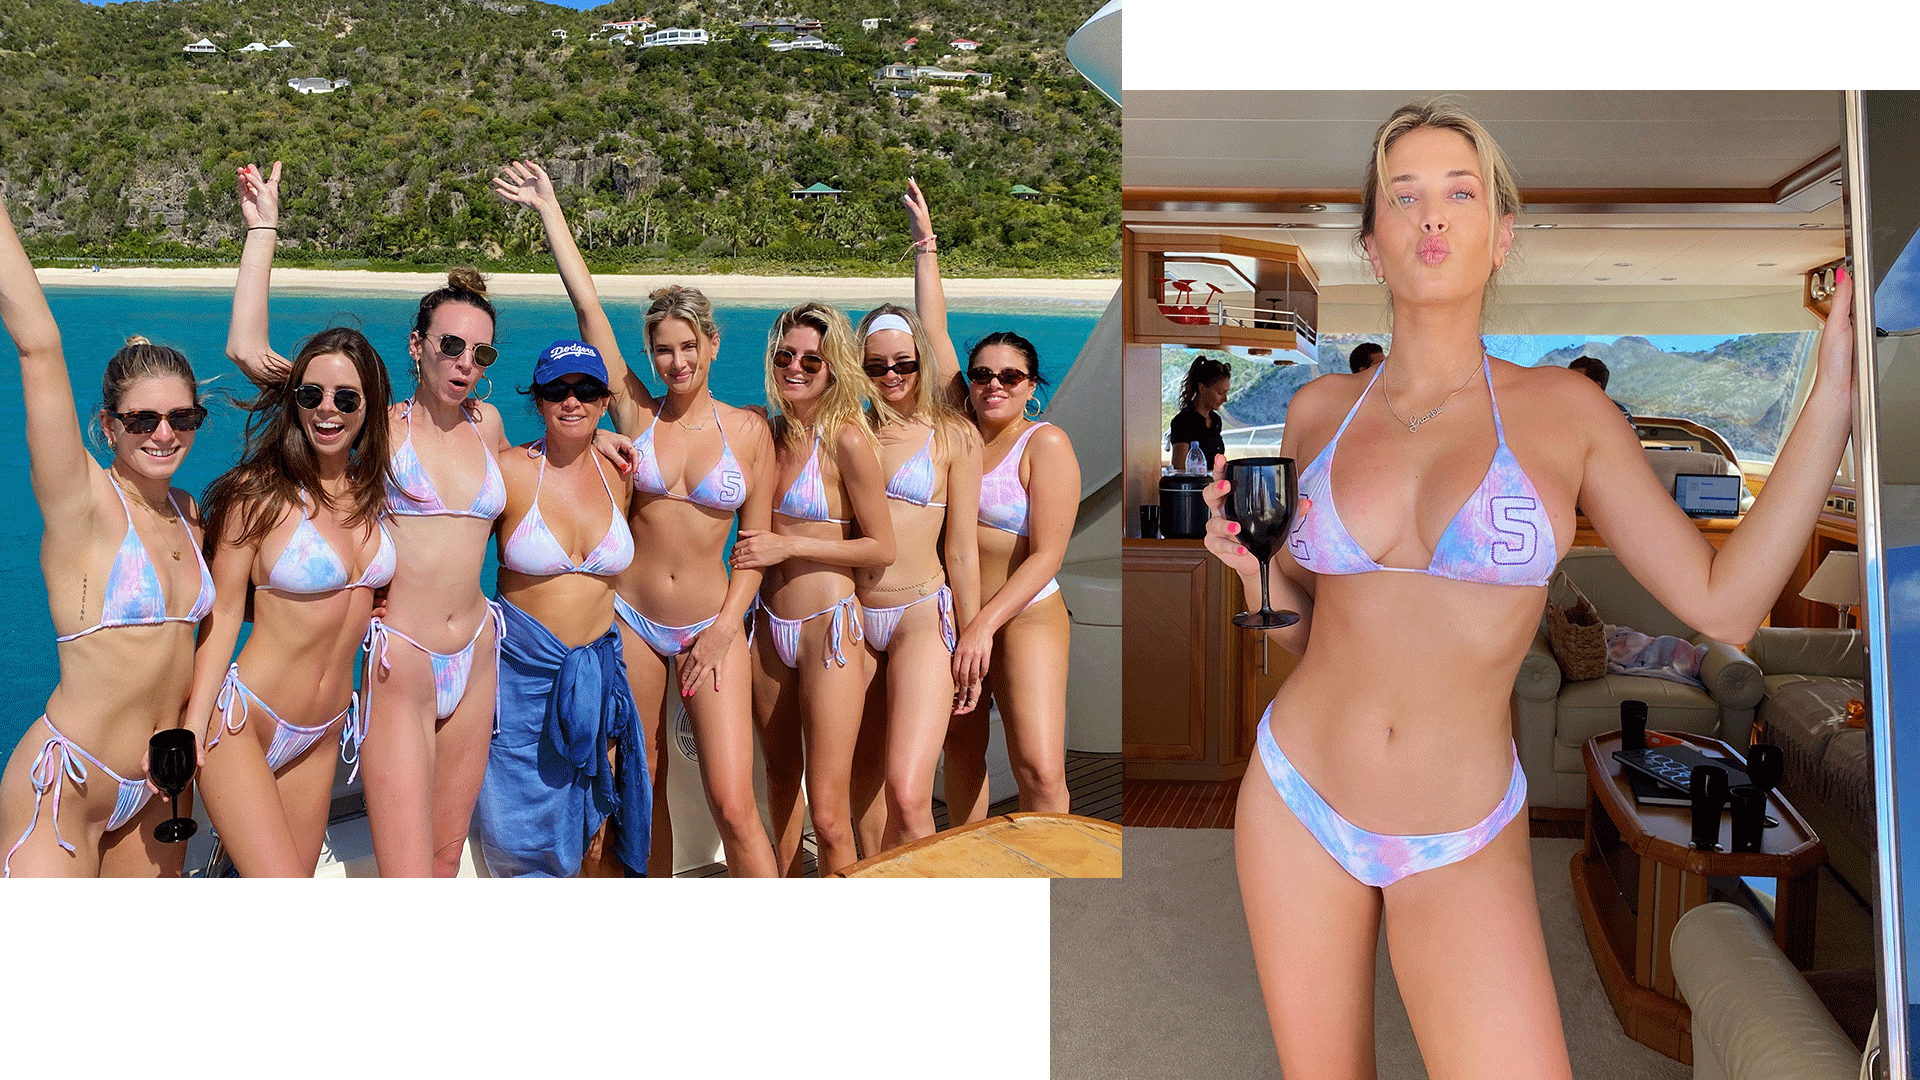 Francesca Aiello, founder and owner of Frankies Bikinis, celebrates her 25th birthday in Saint Barthelemy and releases the Birthday funfetti tie dye collection